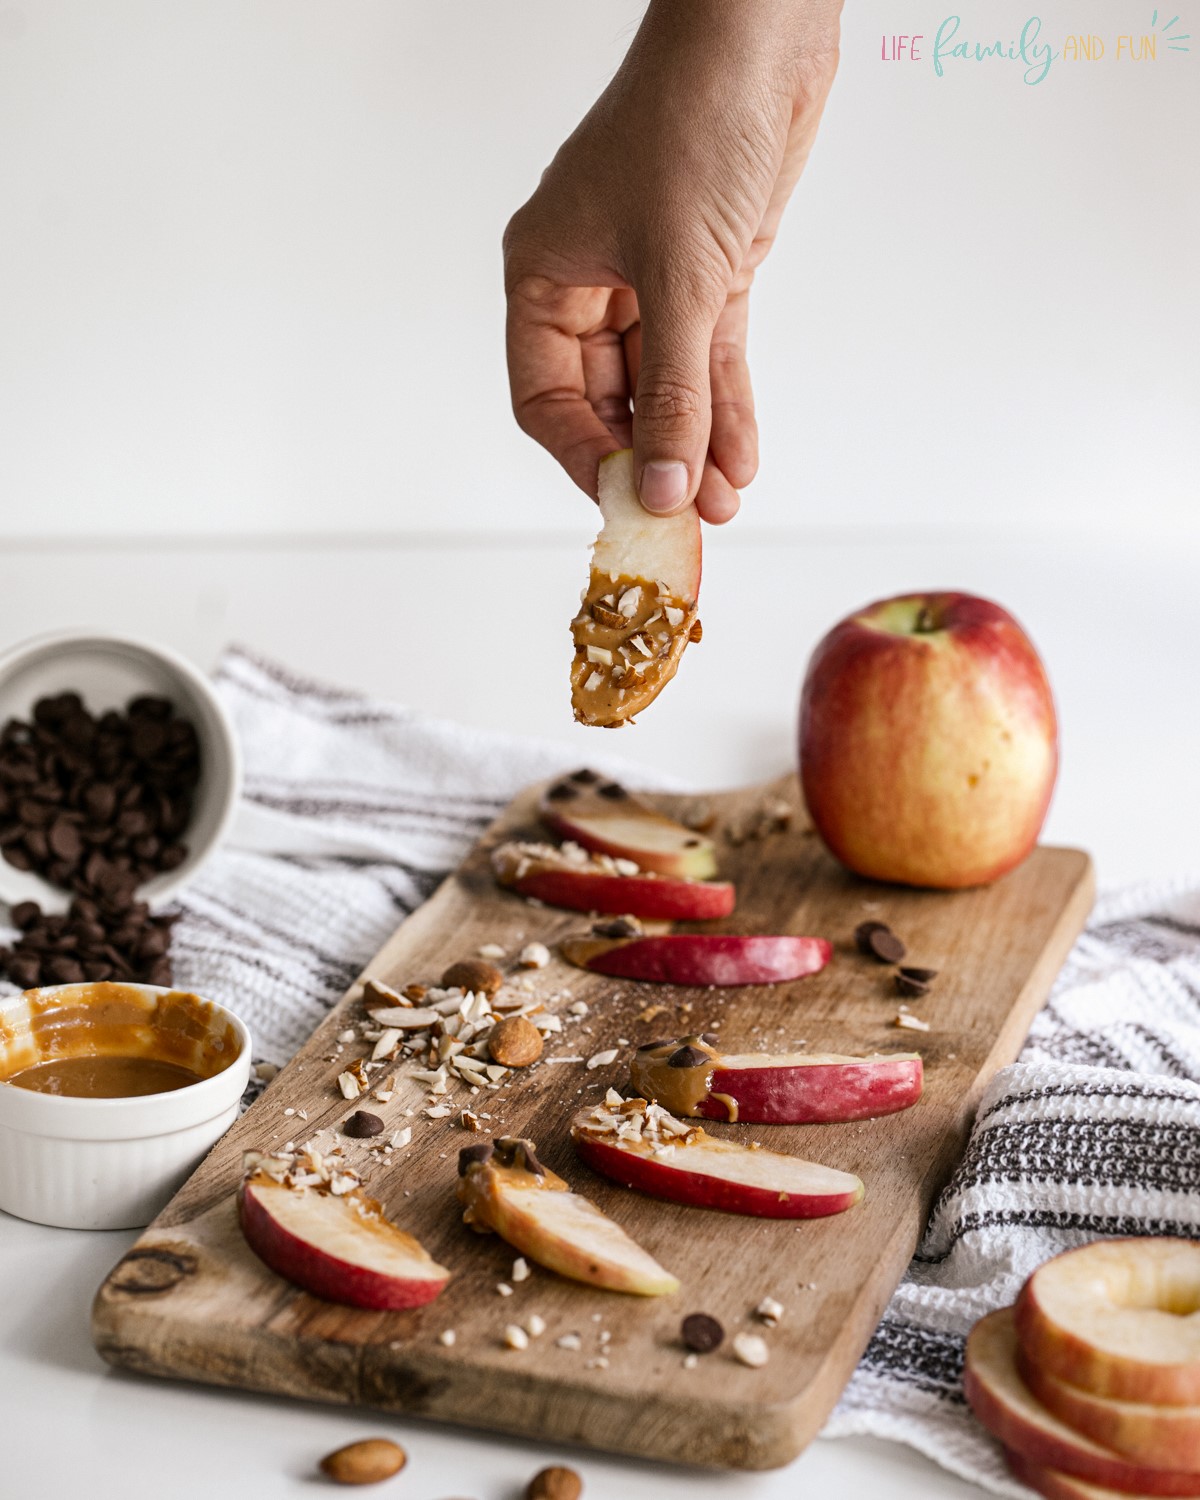 Apple Slices with Peanut Butter - Eat